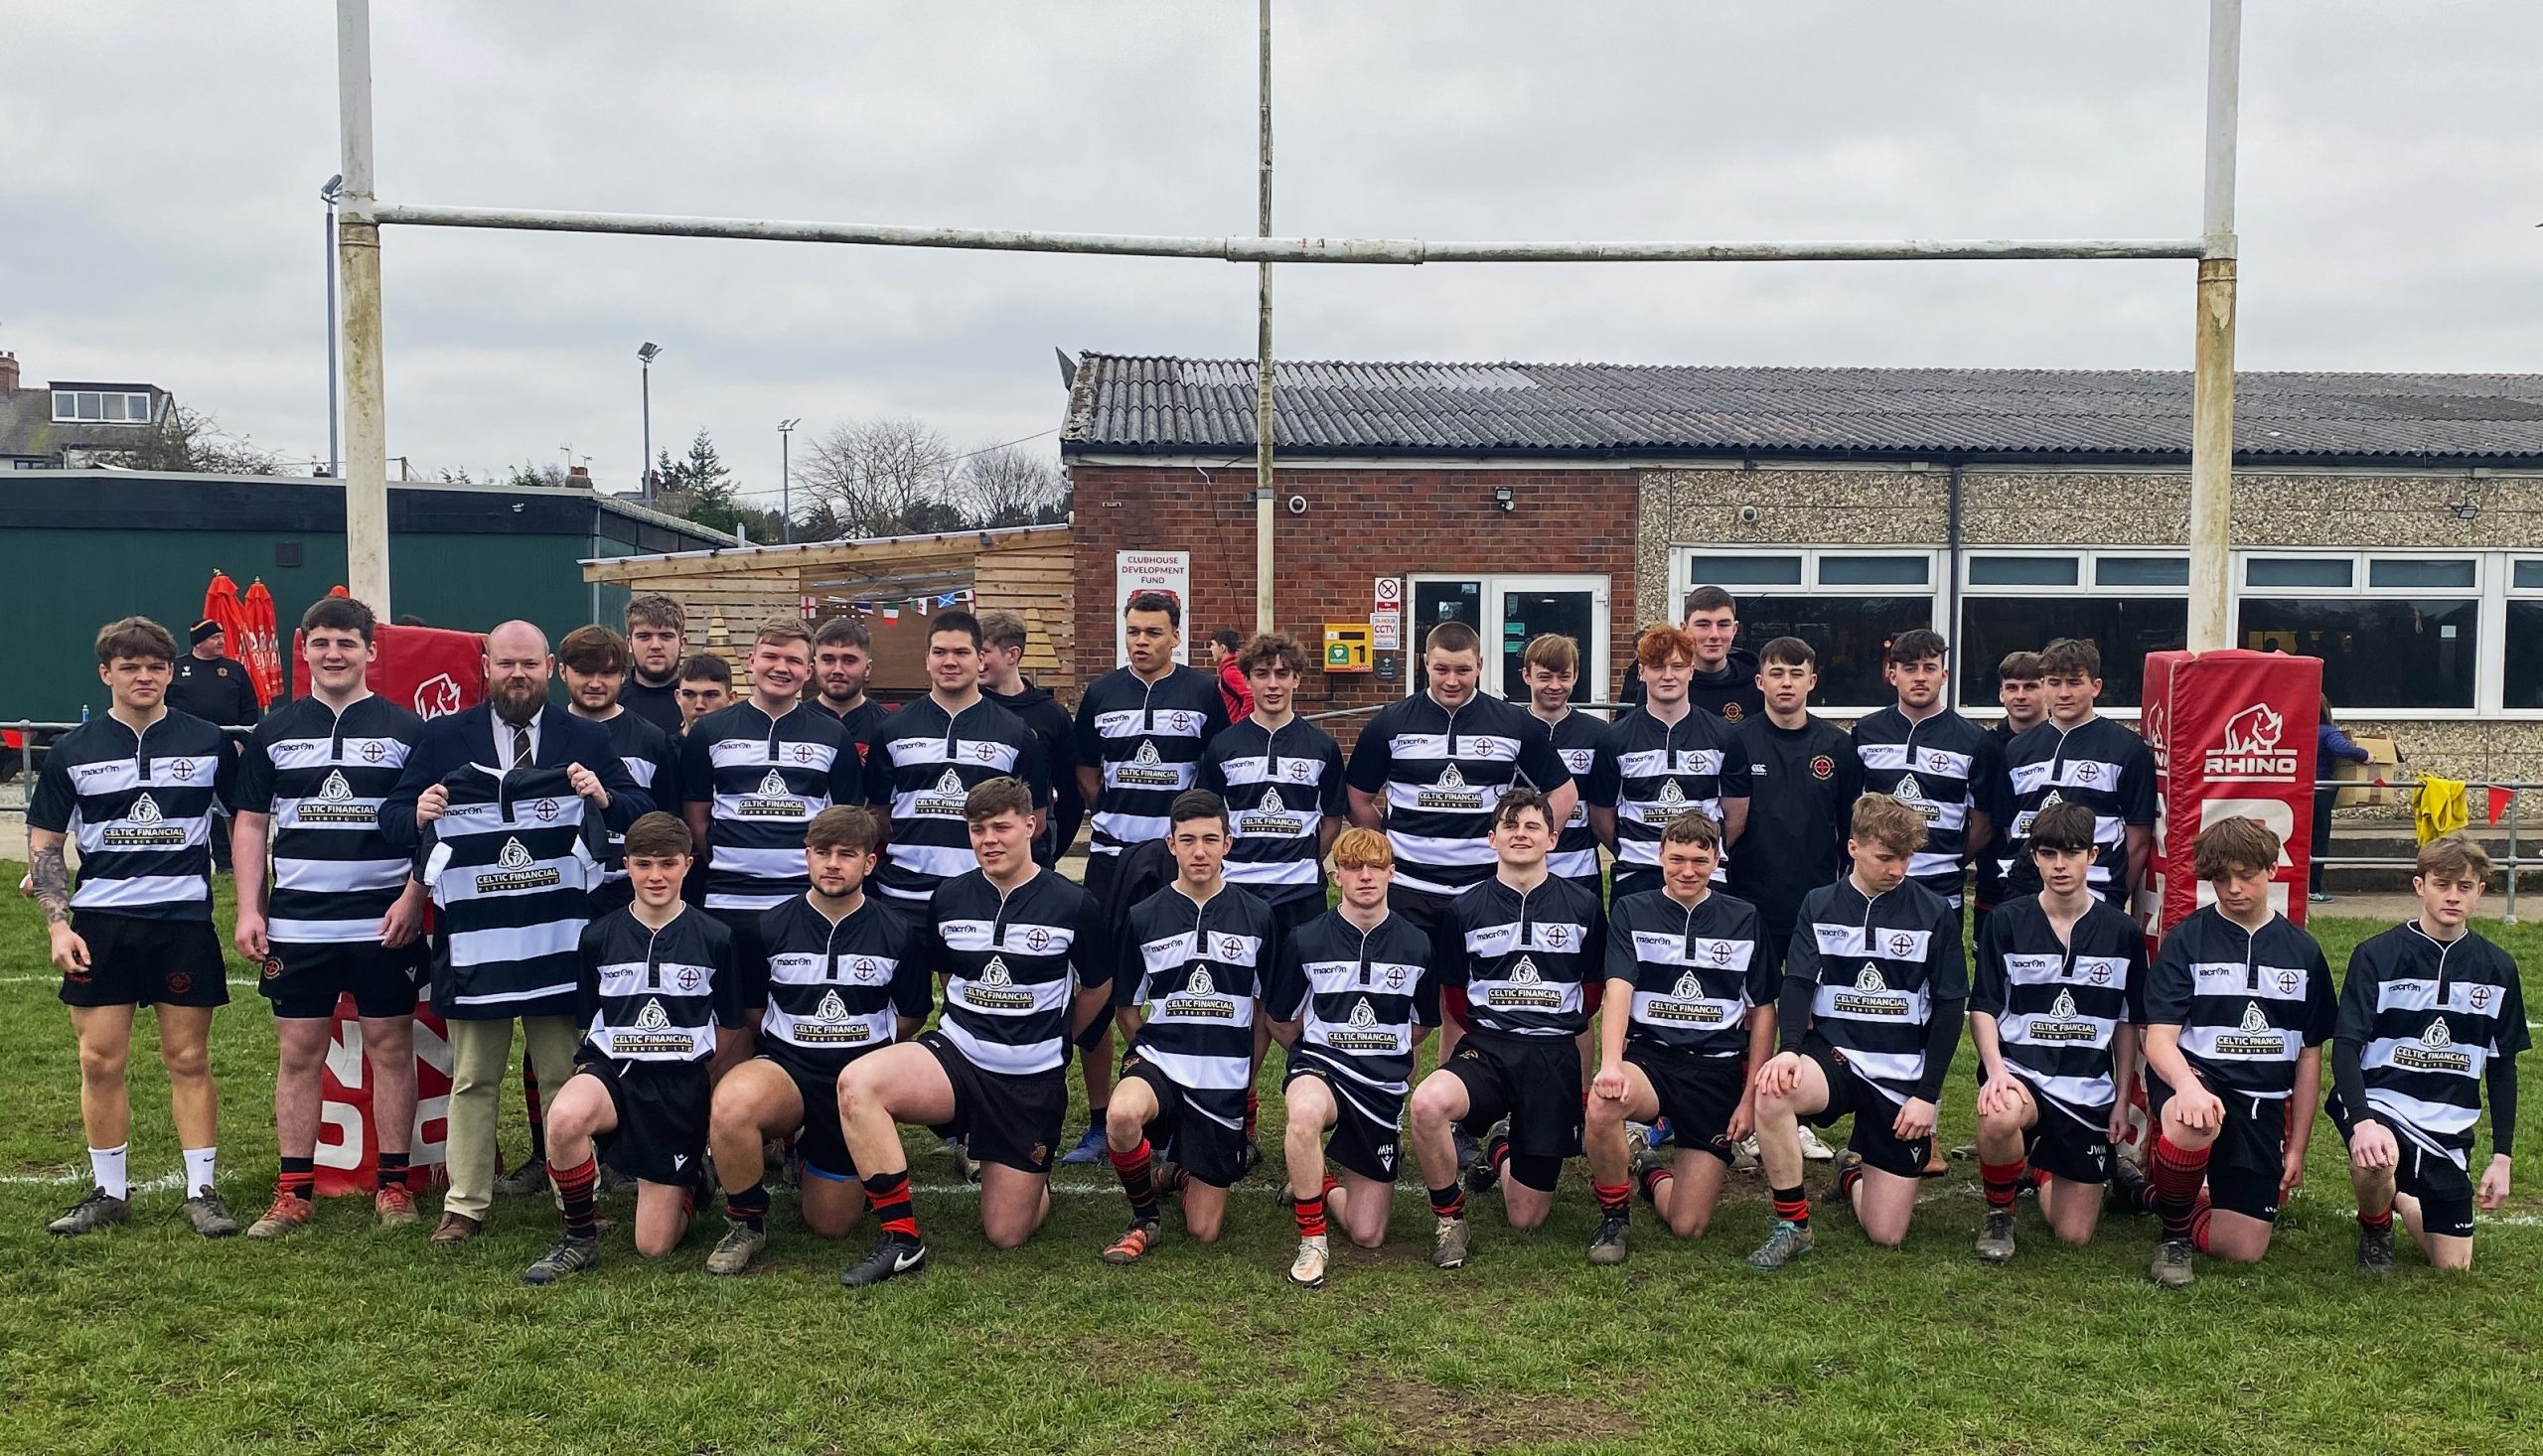 Celtic Financial and Mold Rugby